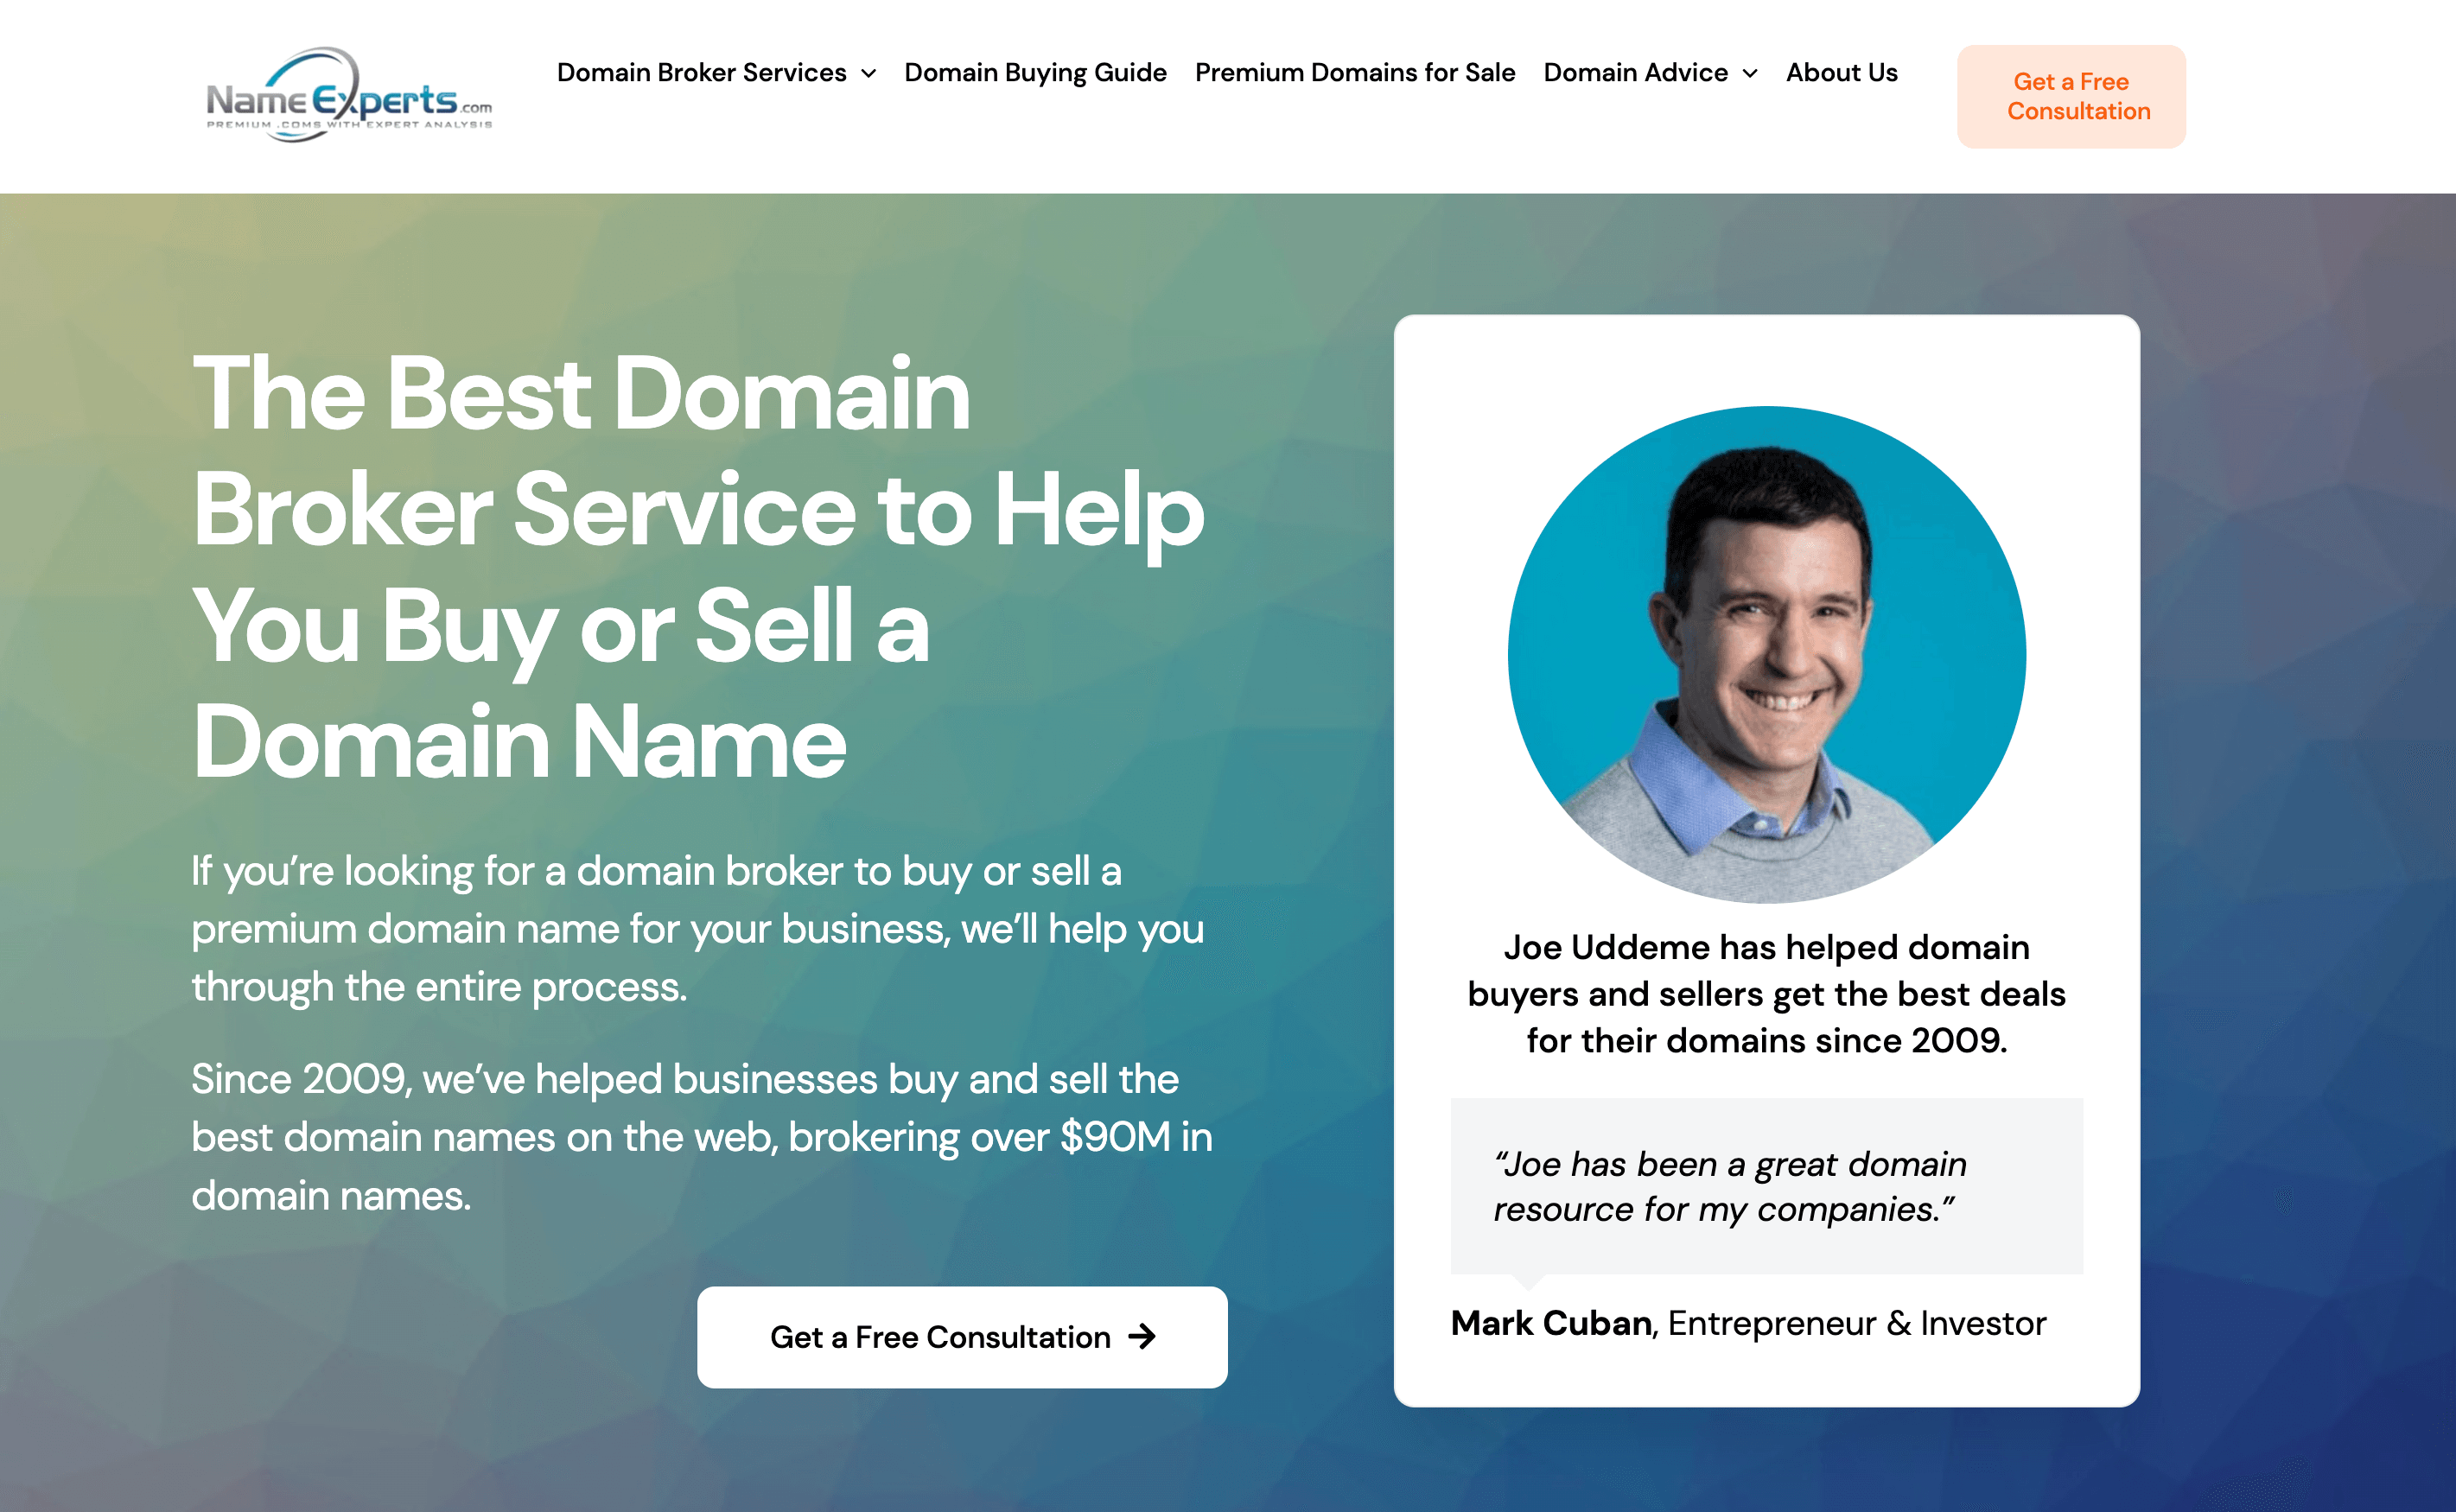 NameExperts' home page